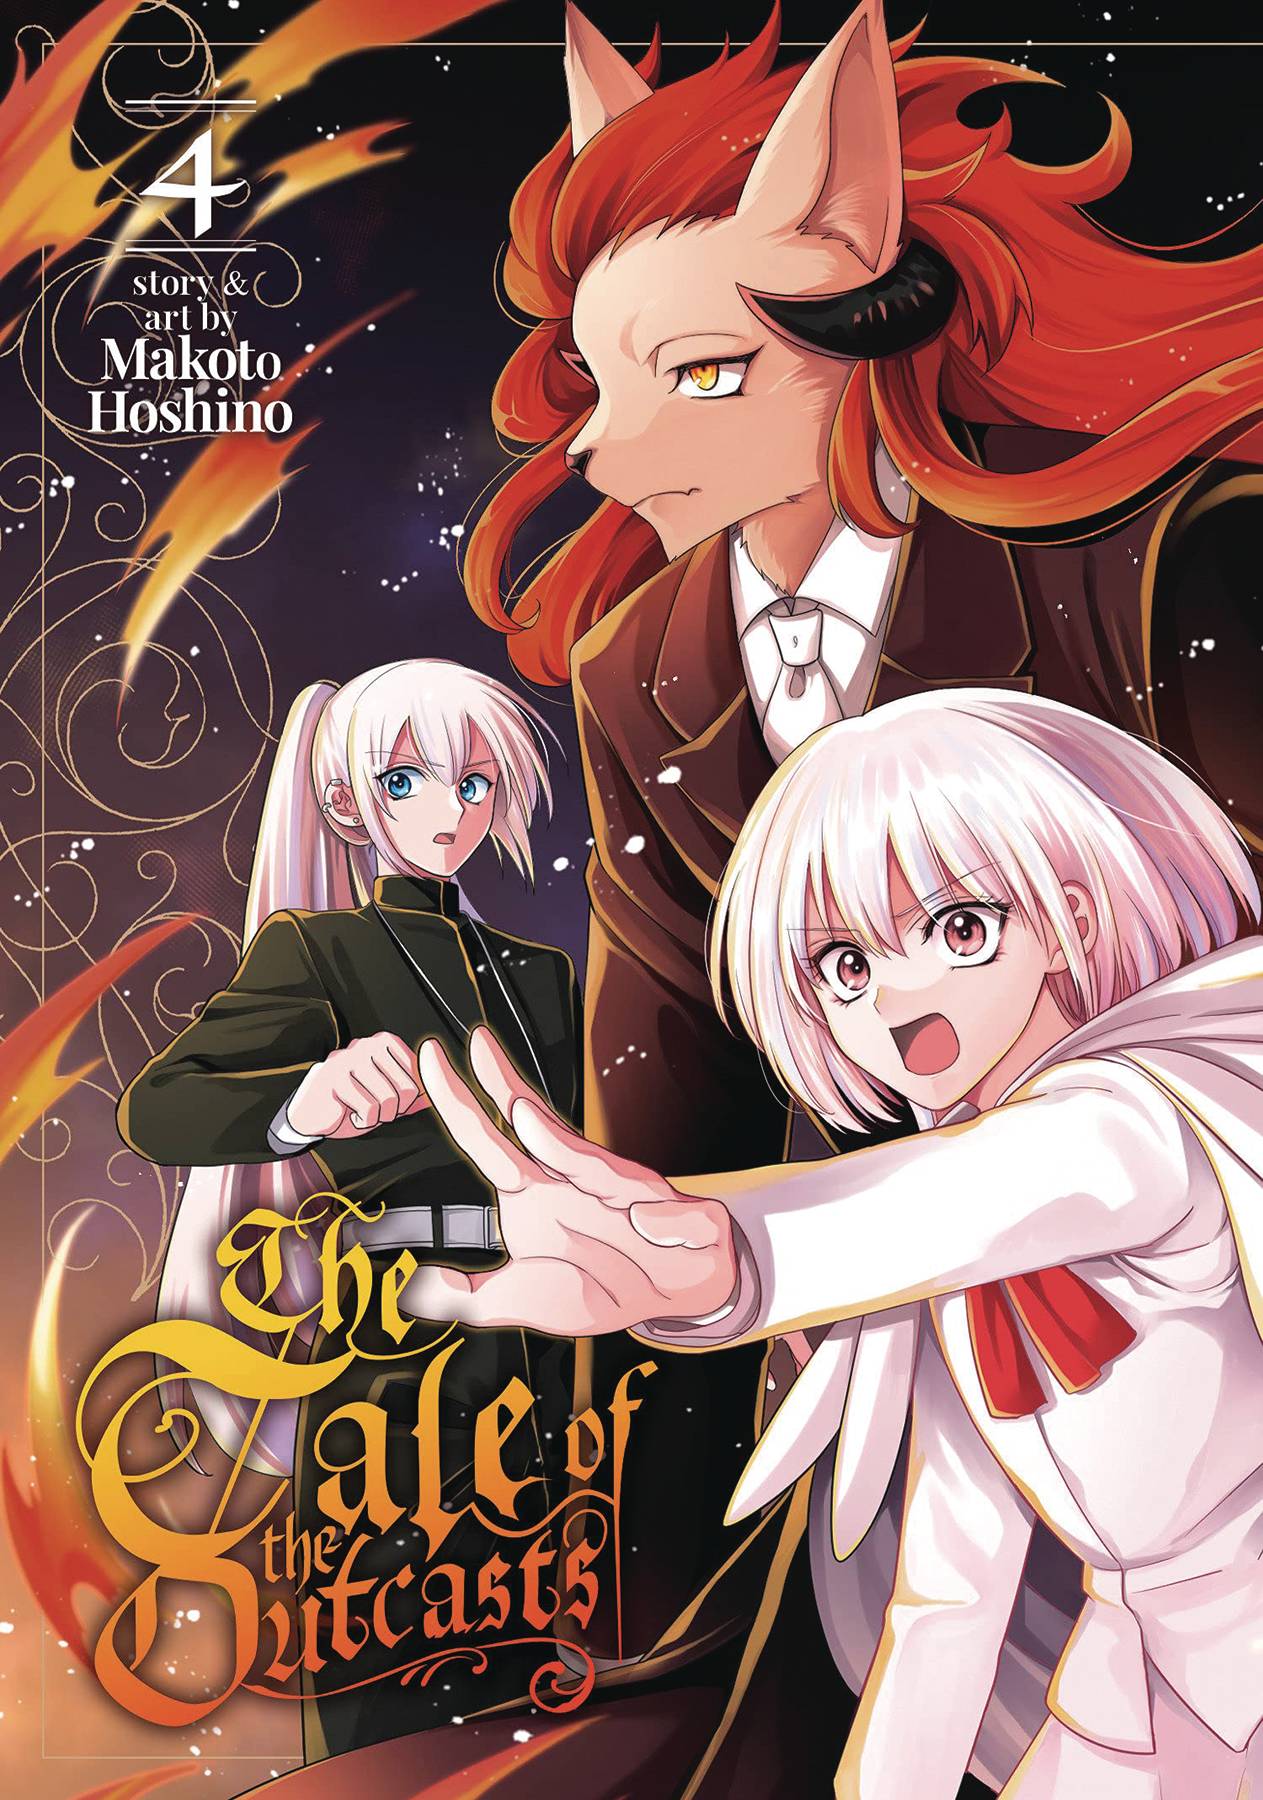 TALE OF THE OUTCASTS GN VOL 04